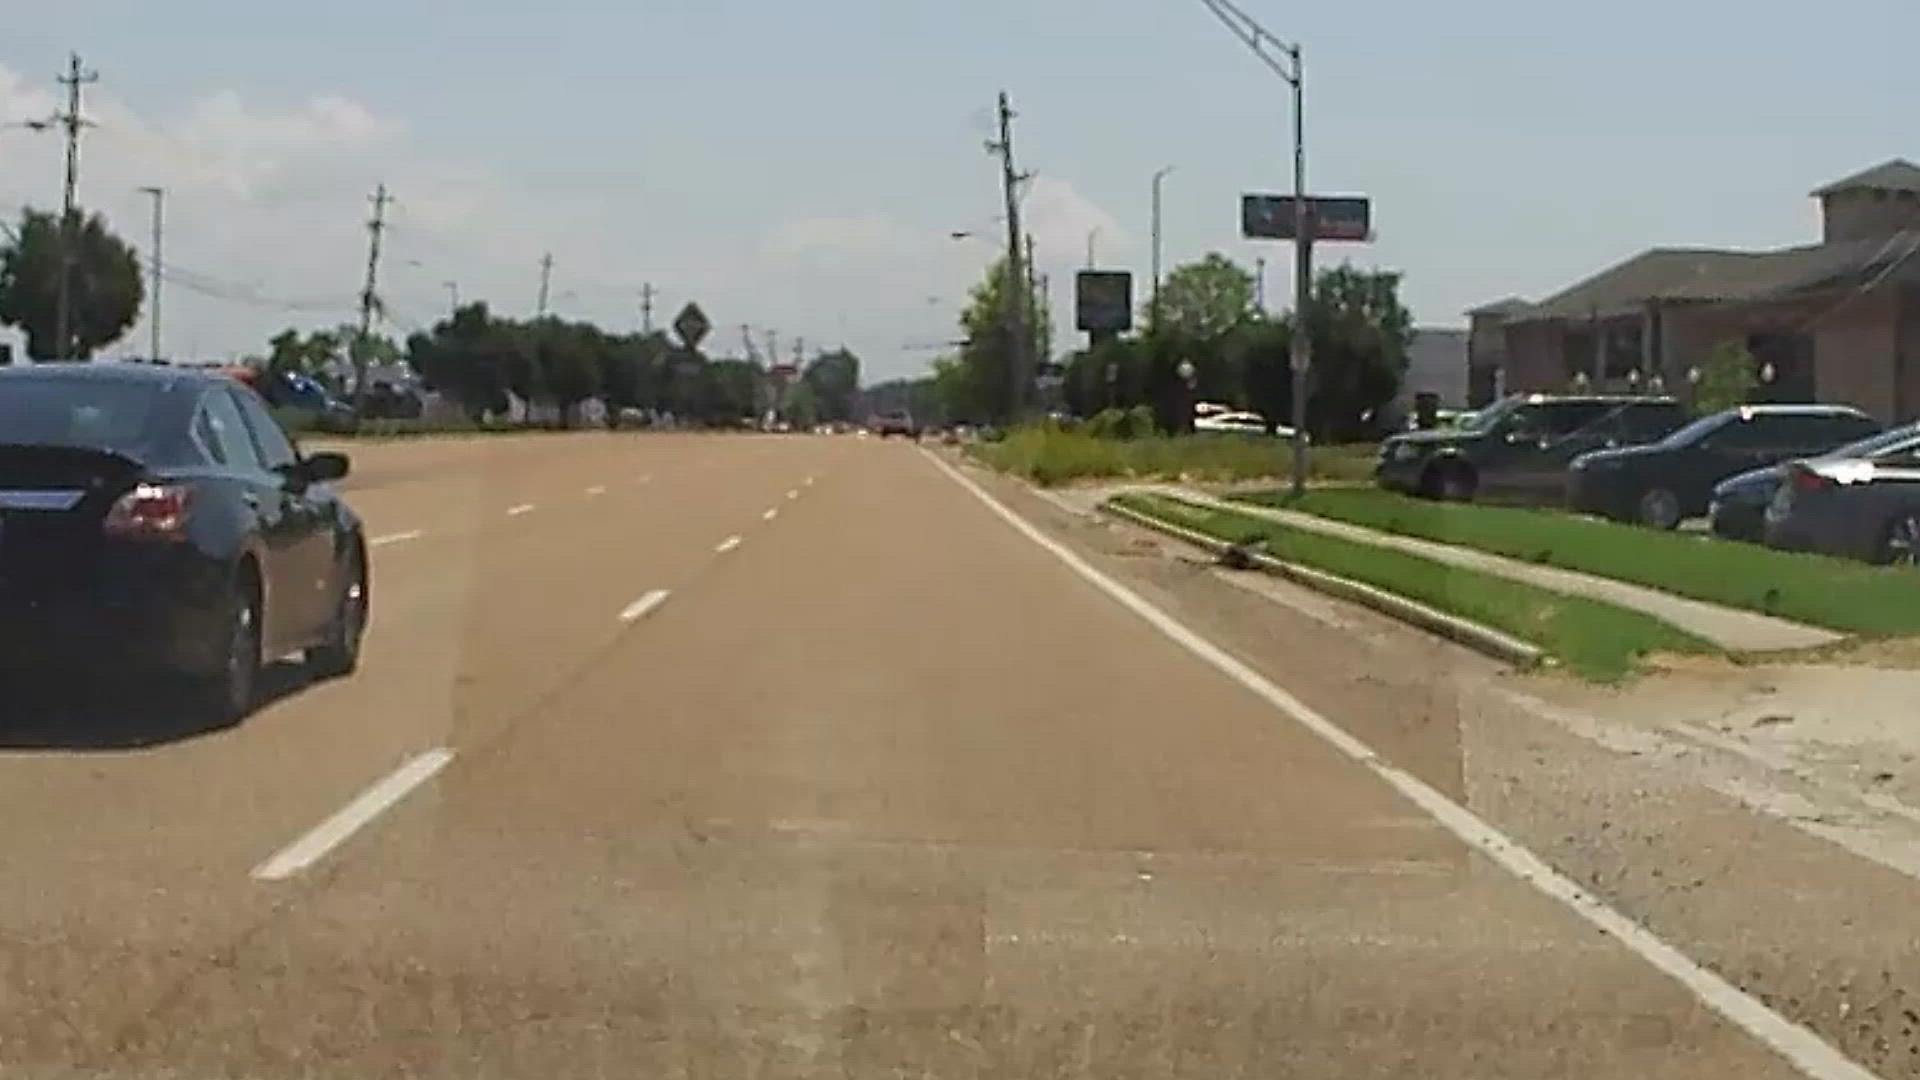 Memphis Police are looking for the driver of a black Audi that seemed to repeatedly target a man on a bicycle near Millbranch and Brooks Roads in Memphis Thursday.